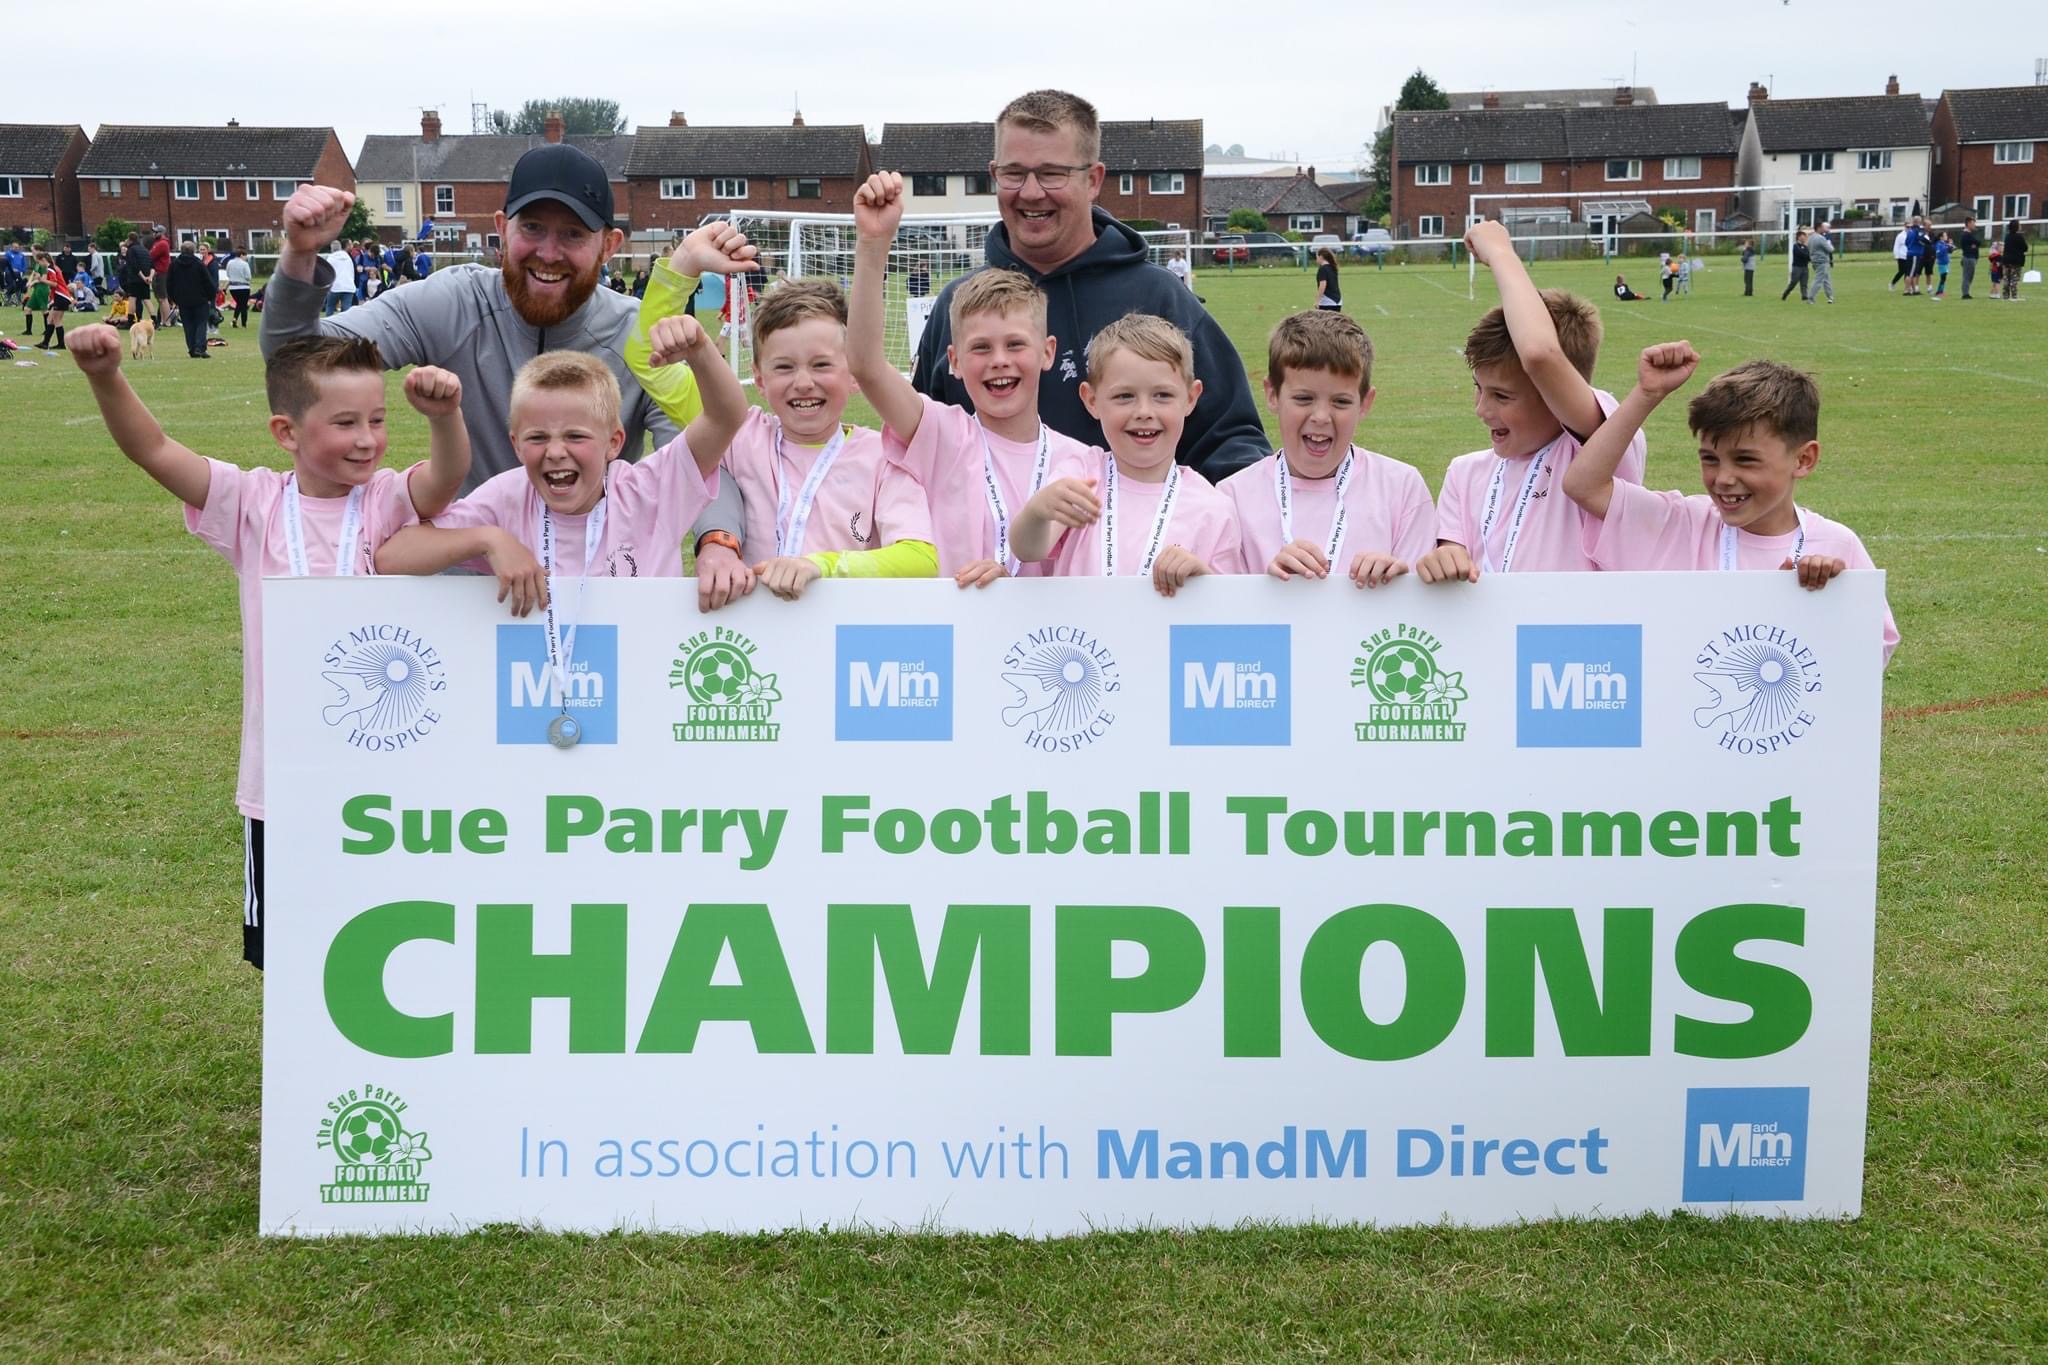 NEWS | Sue Parry Football Tournament raises a record amount for St Michael’s Hospice